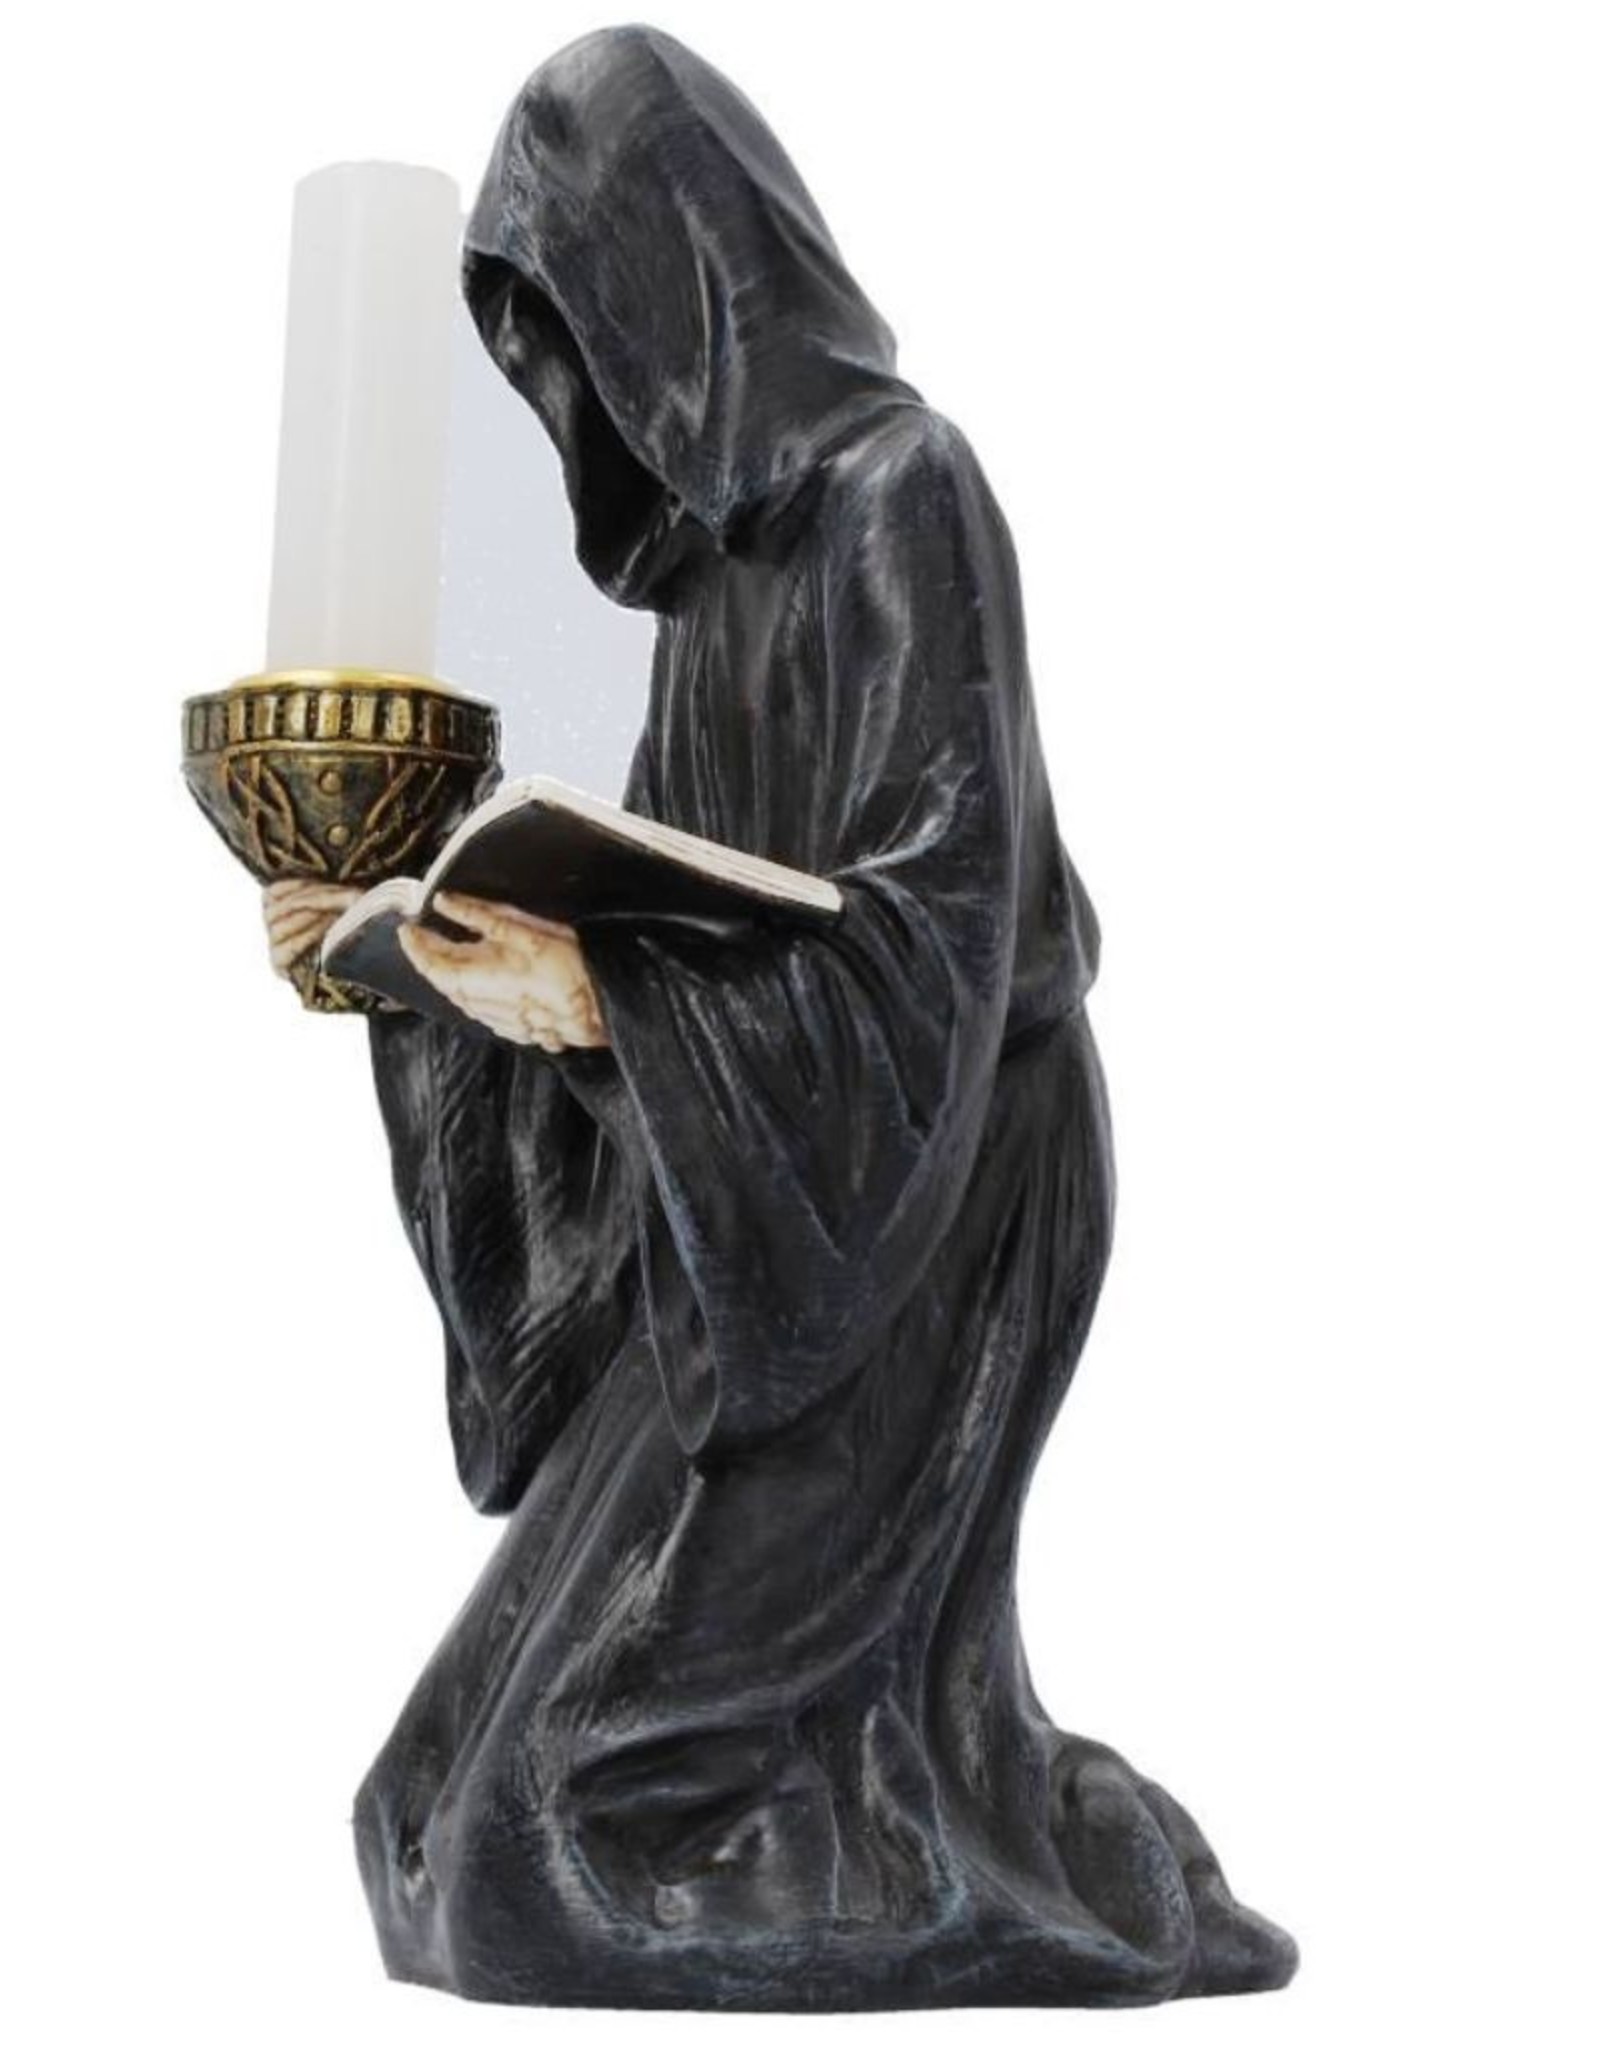 Alator Giftware & Lifestyle - Final Sermon Gothic Candle holder 21cm